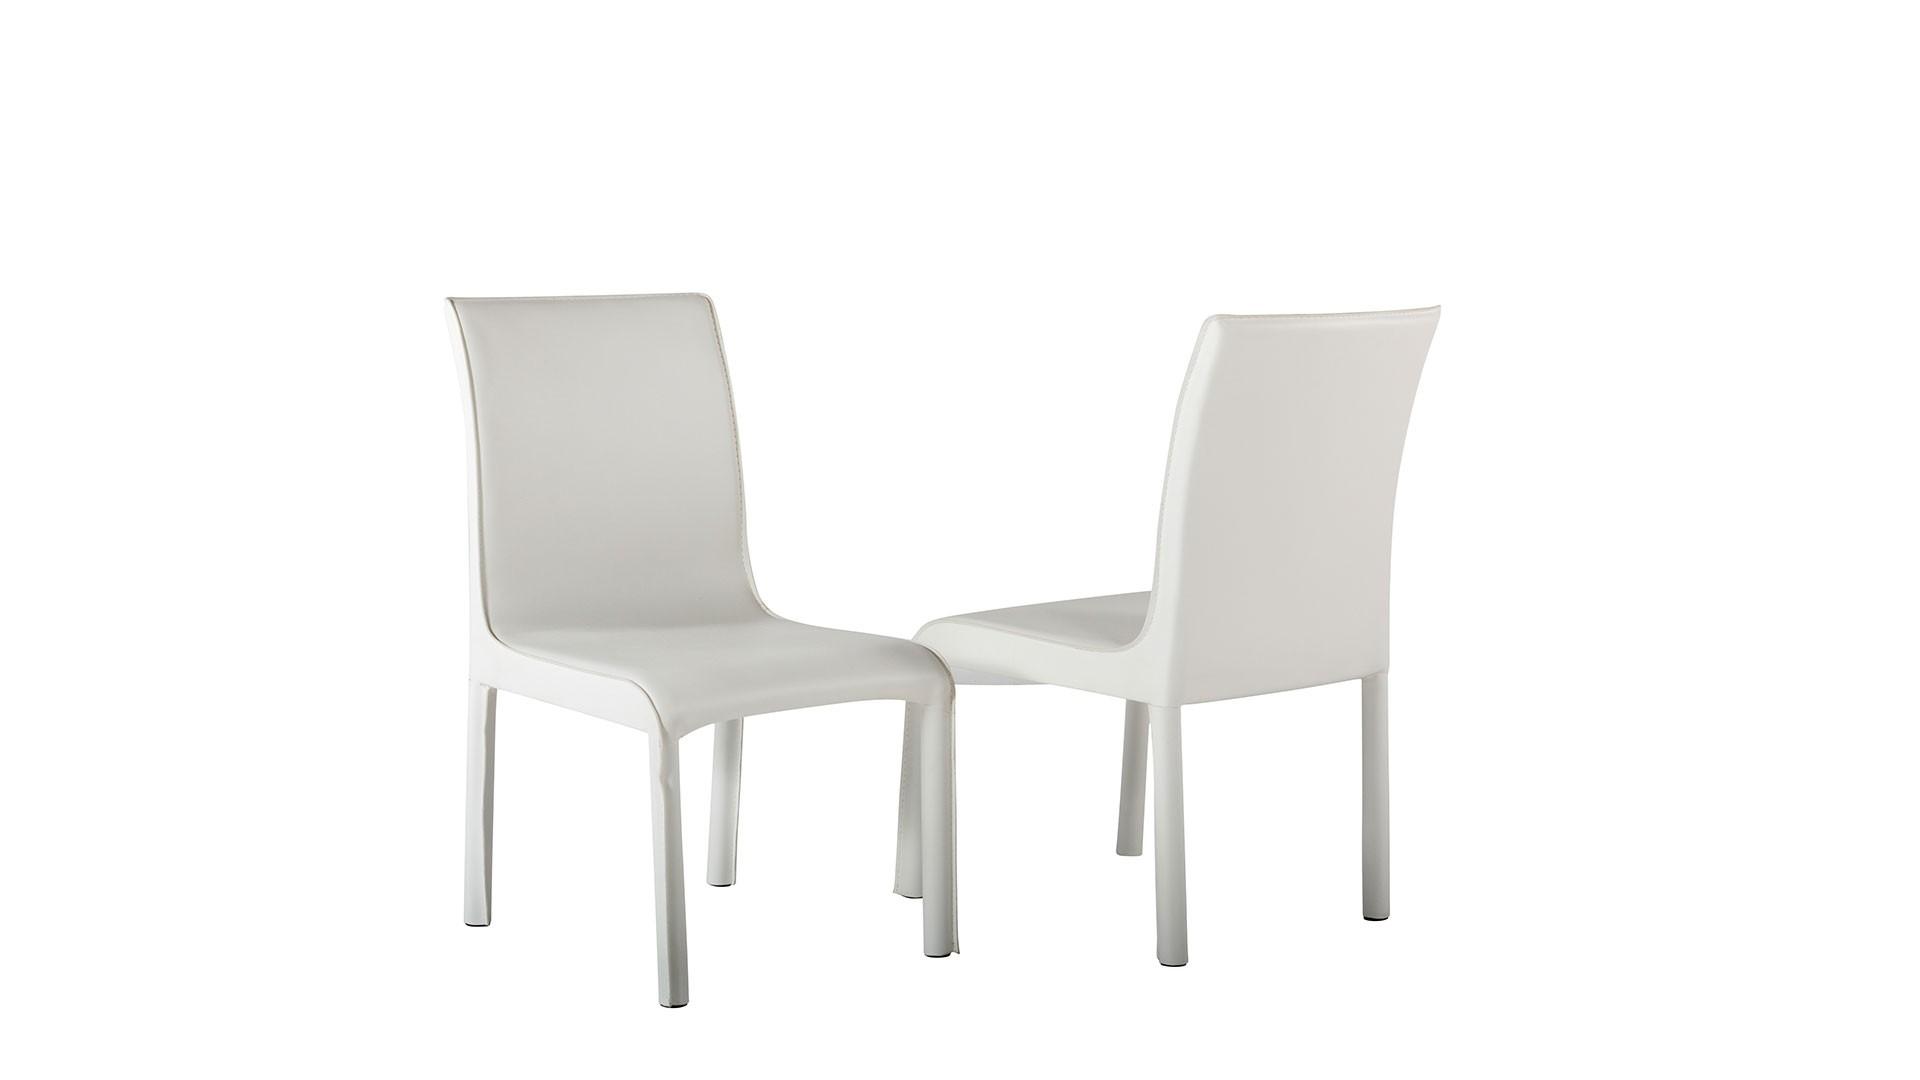 Contemporary Dining Side Chair Swansea SKUDC201027-DC8088-WHITE-Set-6 in White Eco-Leather